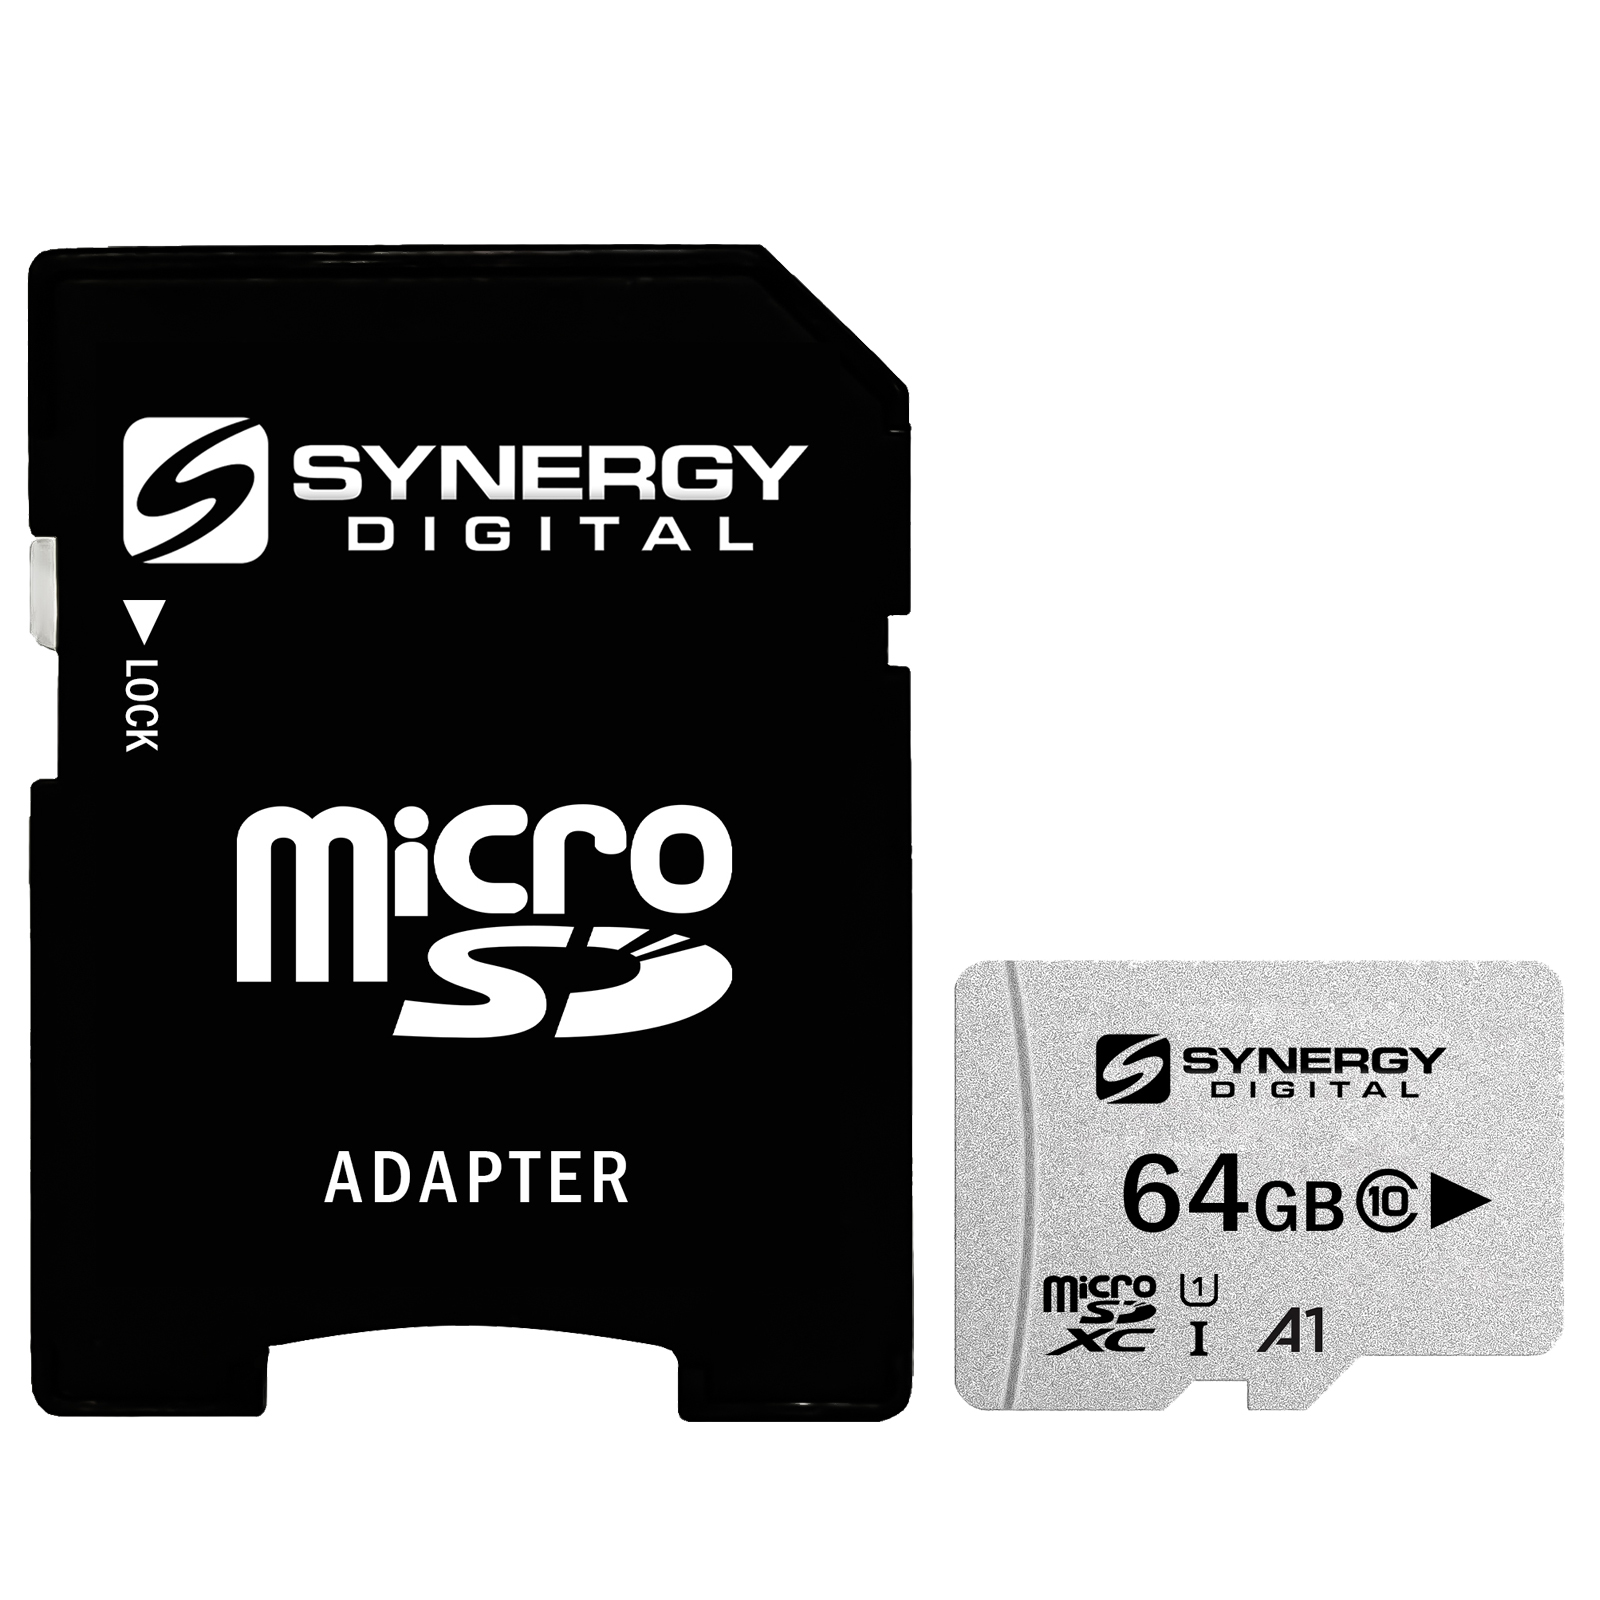 Memory Cards for AiptekCamcorder